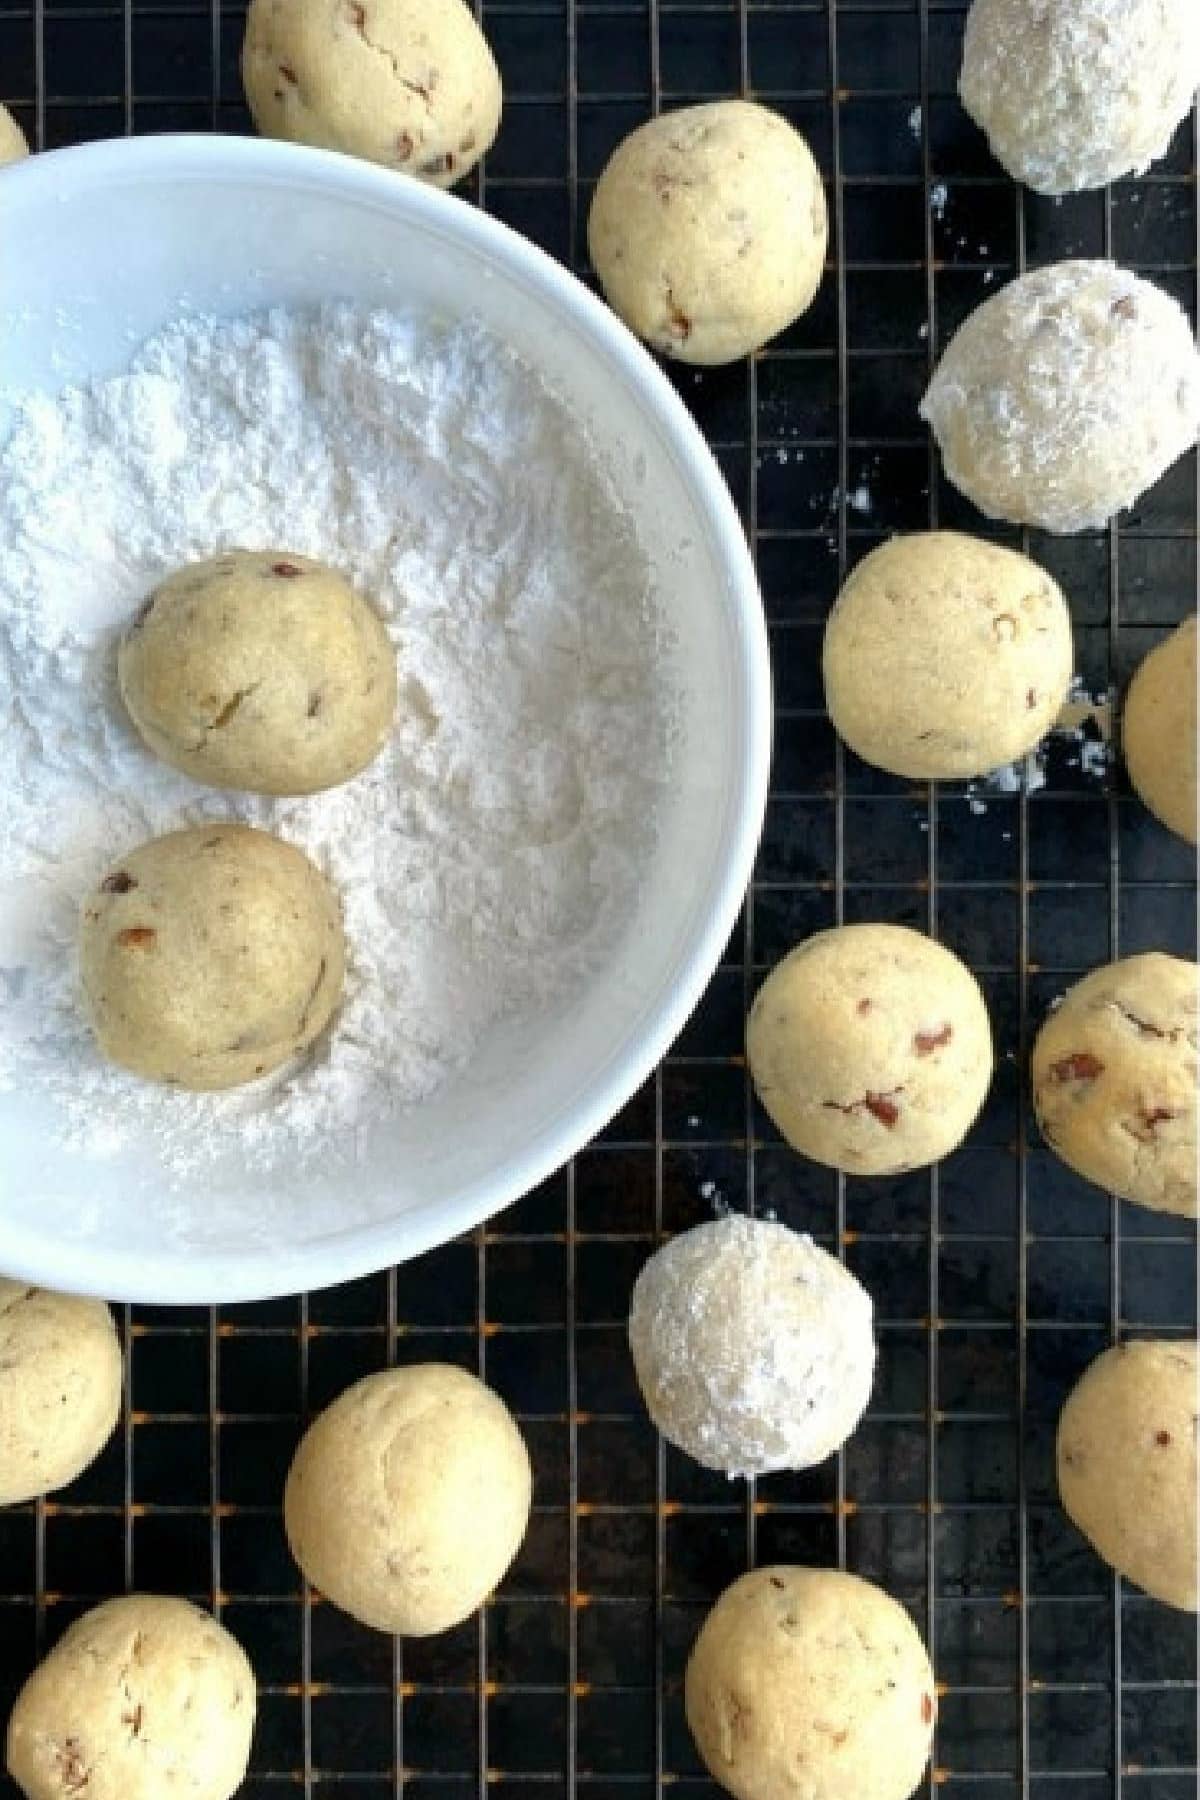 Rolling baked Russian Tea Cakes in Powdered Sugar